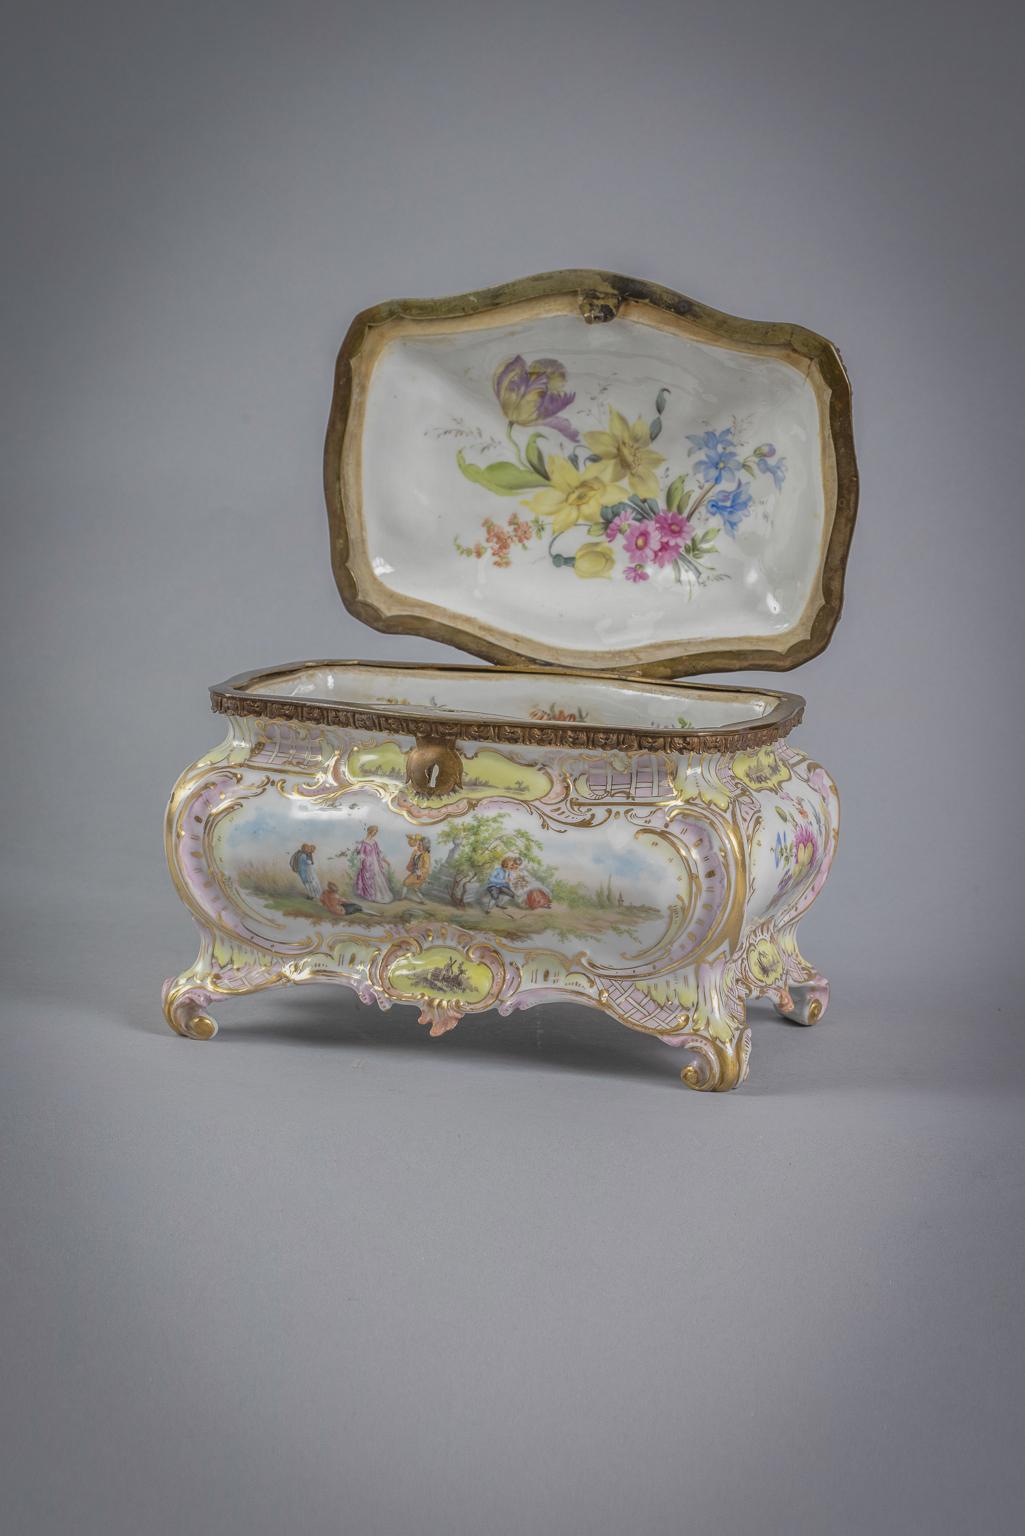 Reserves painted with figures in landscapes alternating with floral reserves, edged in gilded scrolls, the interior with full blown floral decoration.